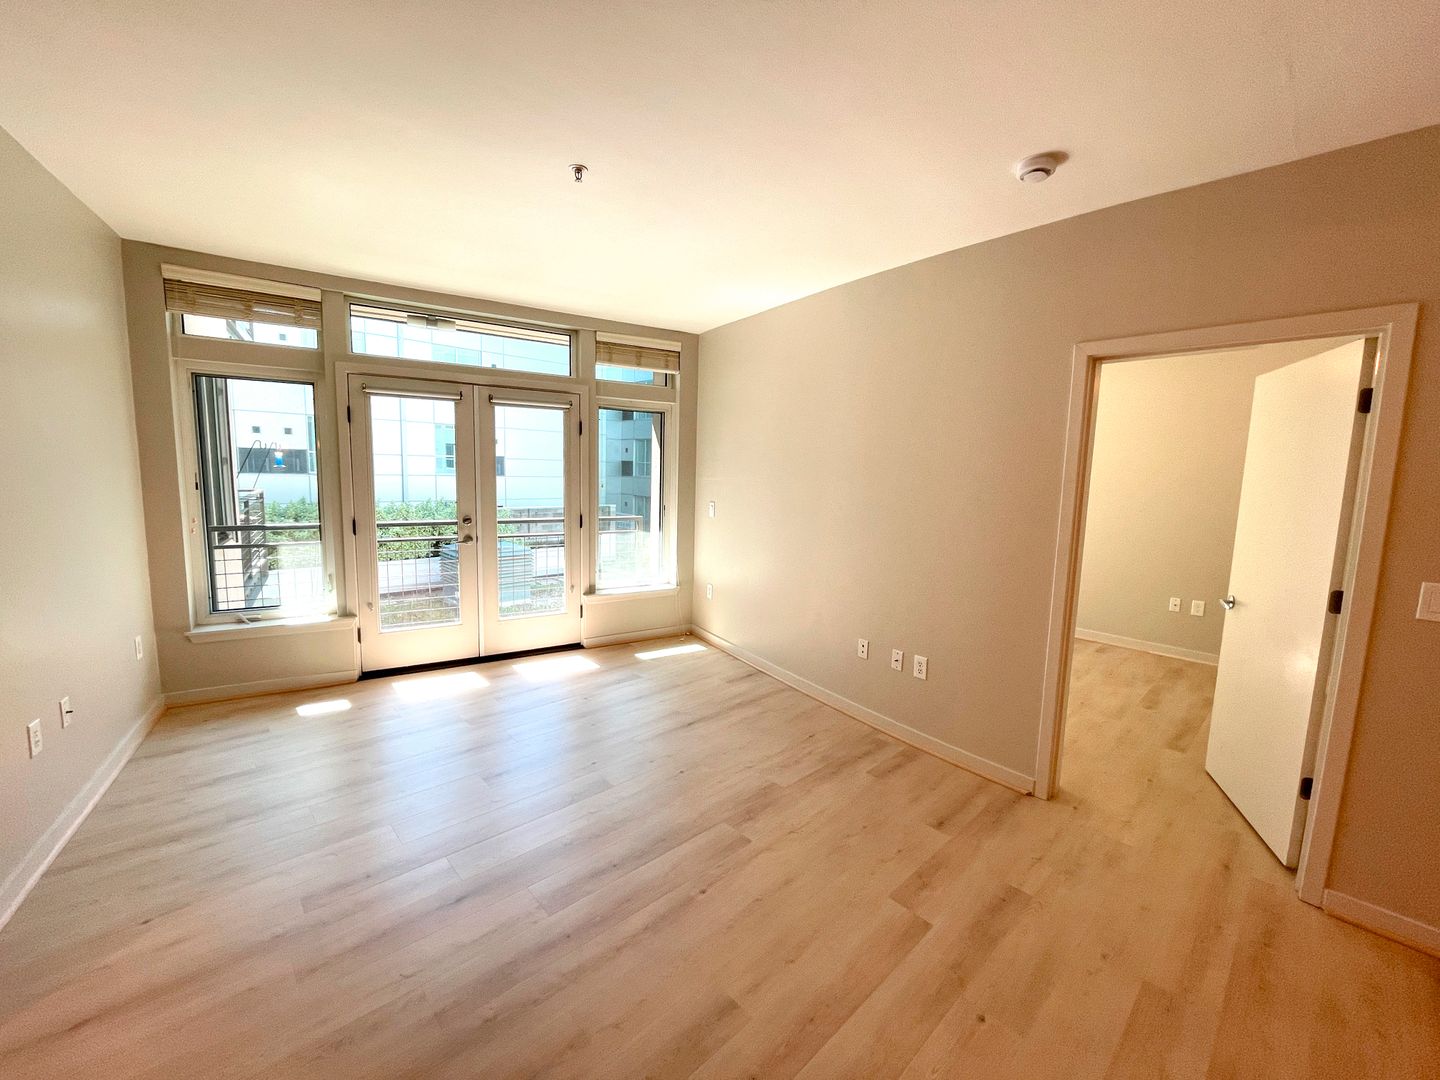 Bright Condo in NW Portland with Washer/Dryer In-Unit and Juliet Balcony